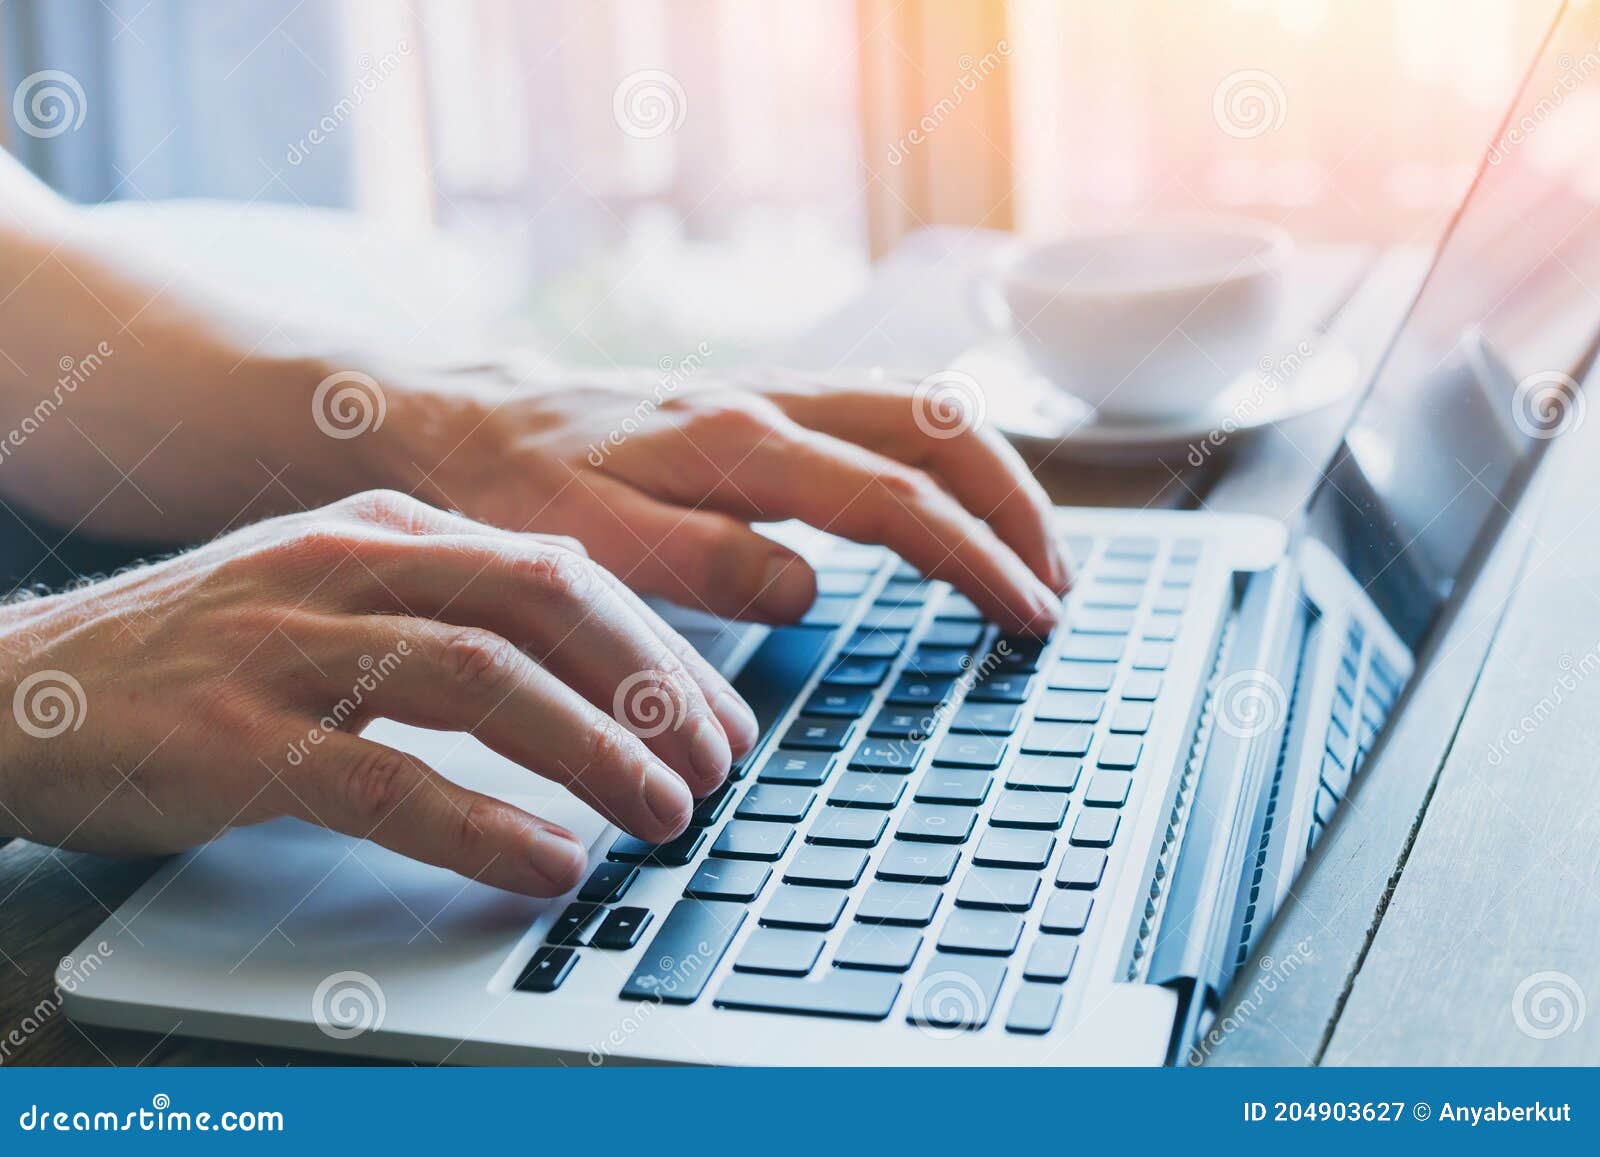 typing on keyboard, close up of hands of business person working on computer